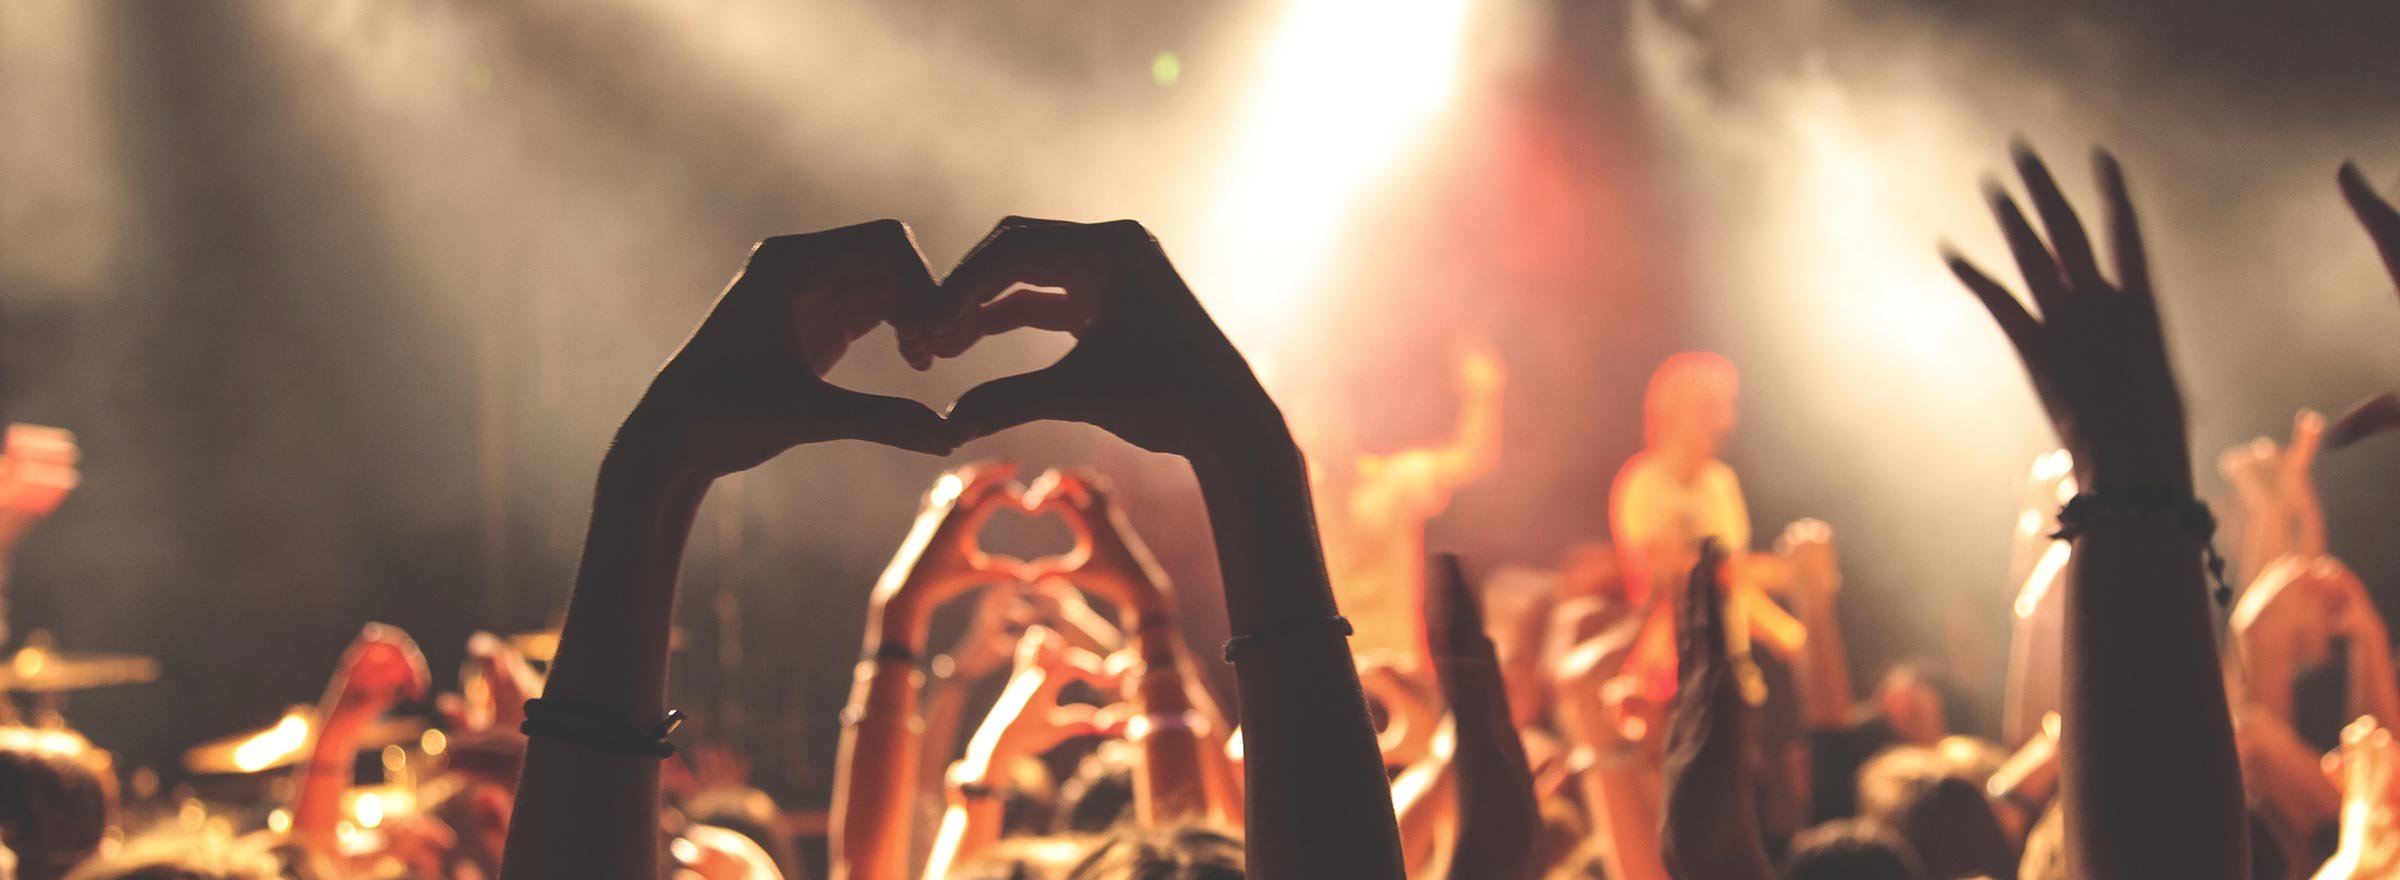 people at a concert holding up their hands in the shape of a heart, representing millennials and their potential to support nonprofit causes and fundraising